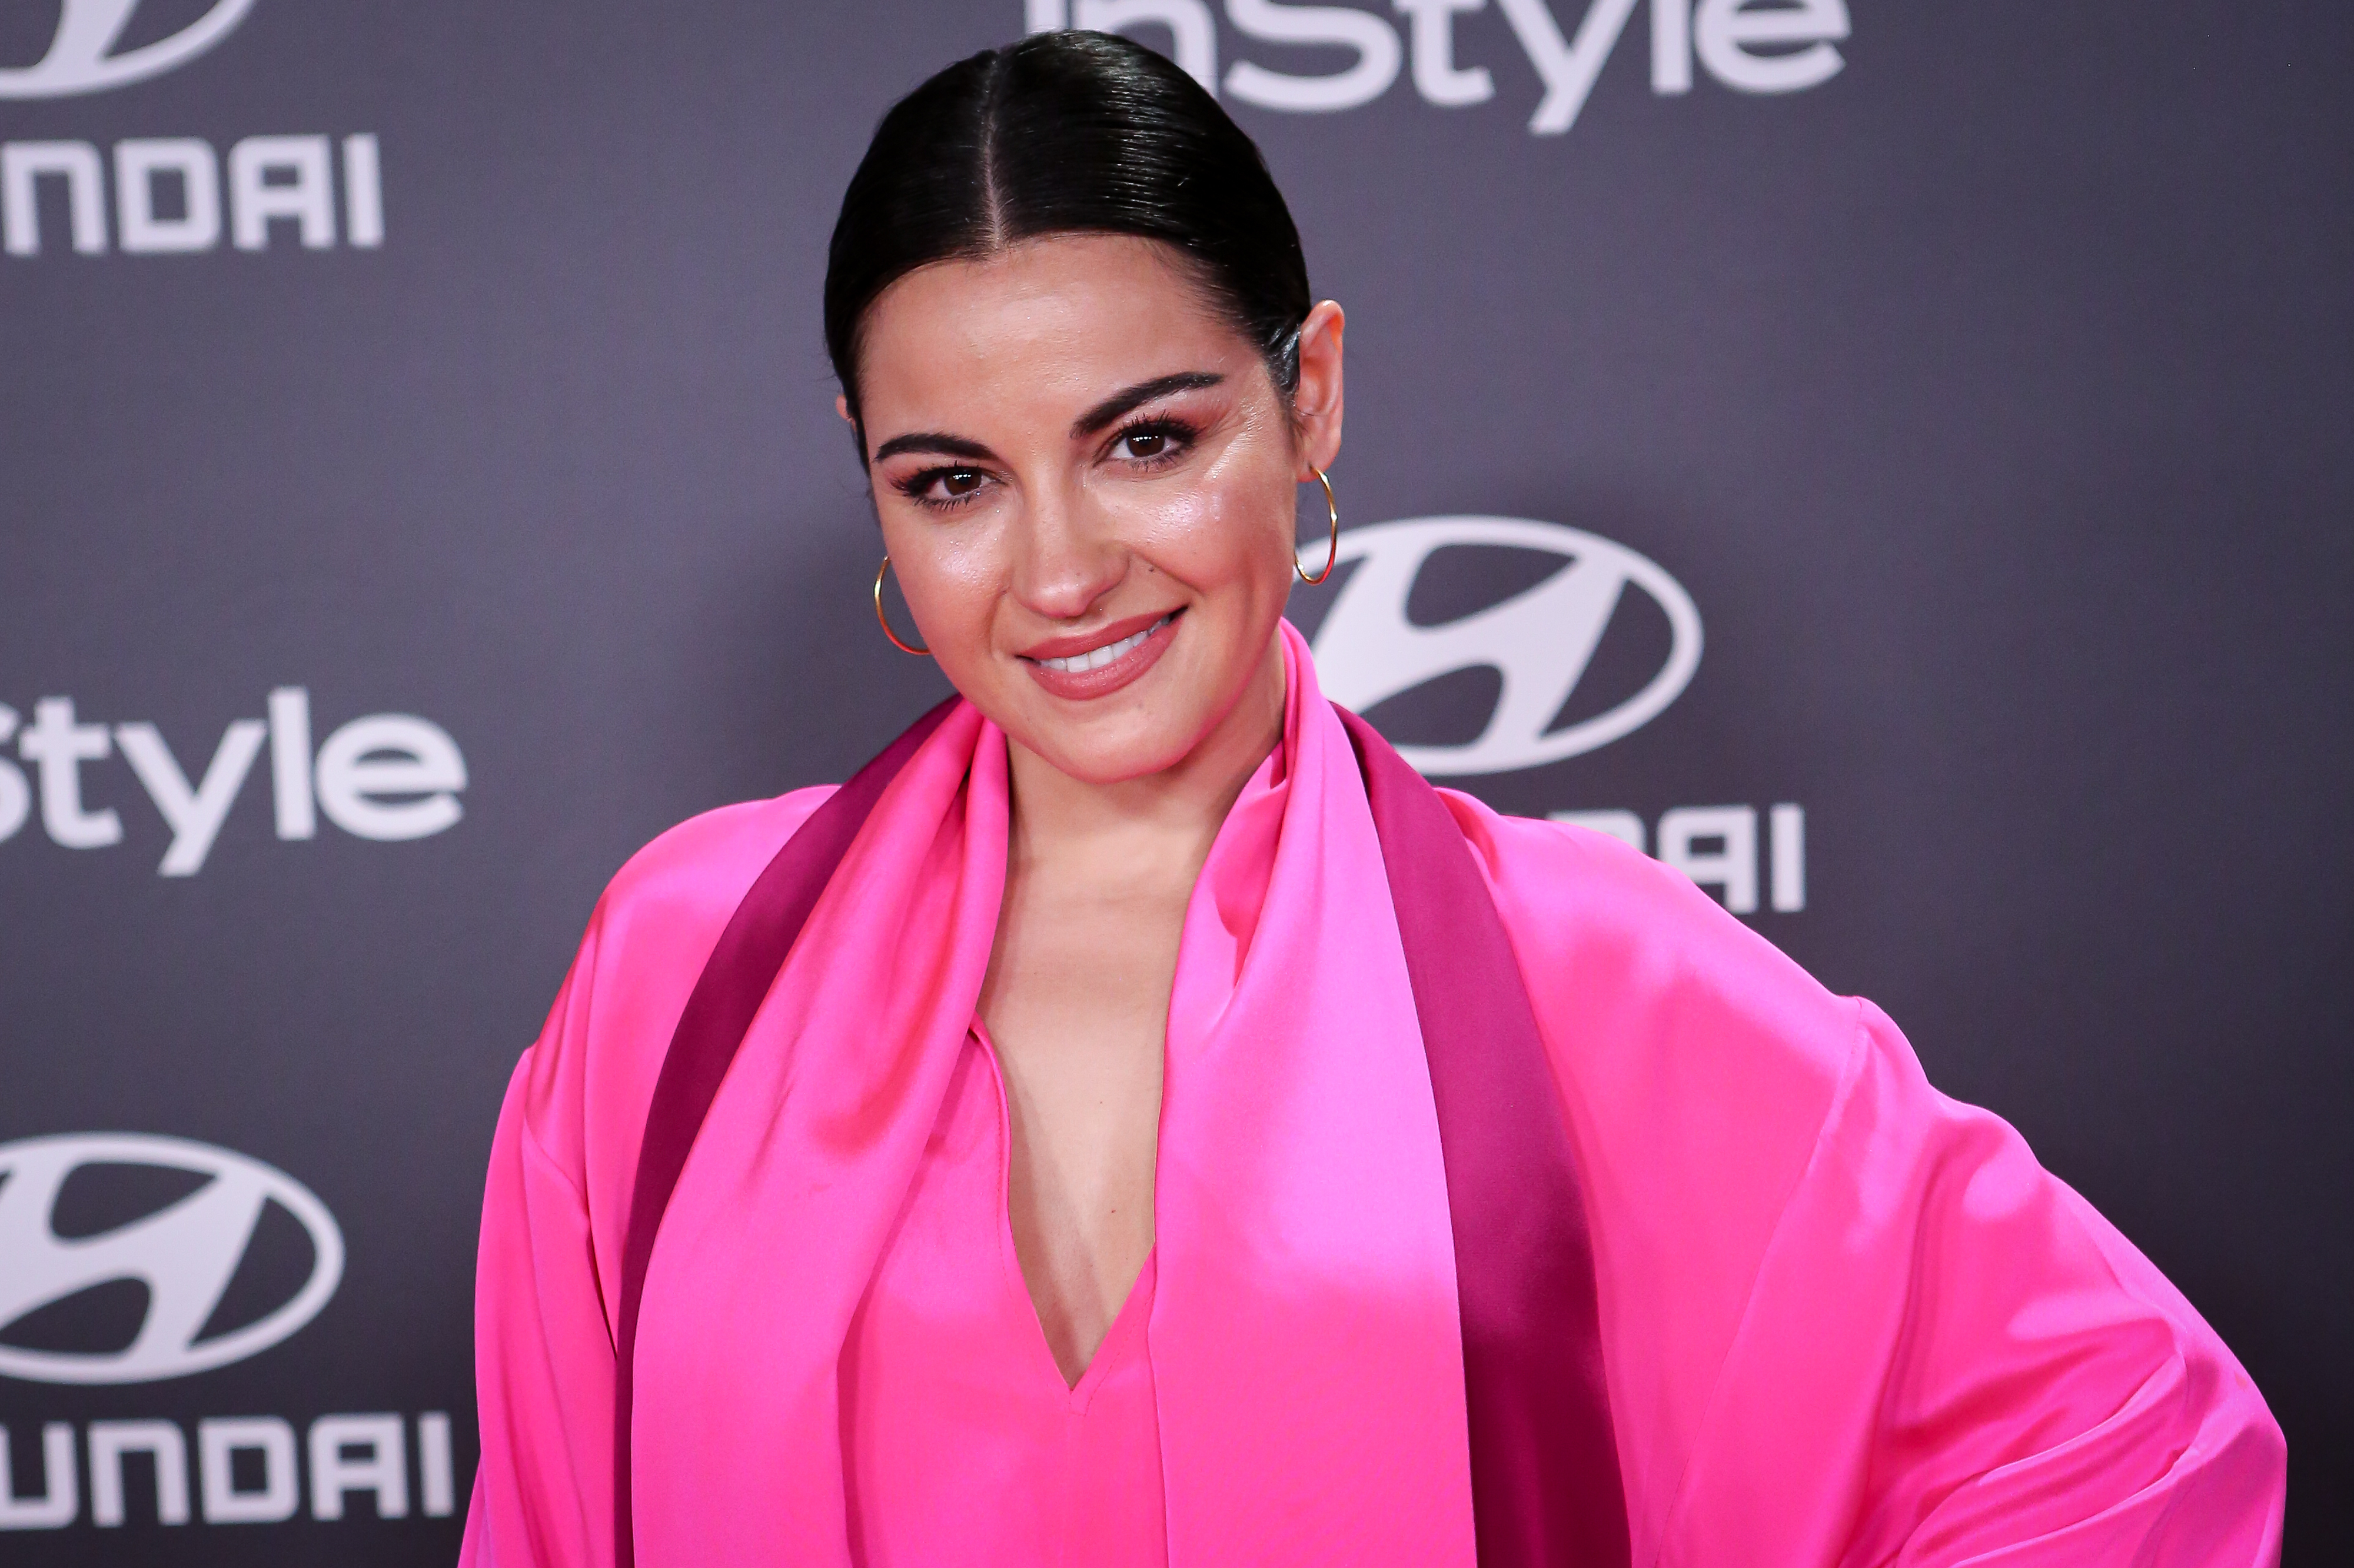 MADRID, SPAIN - MAY 24: Maite Perroni attends 'Instyle Beauty Night' party at the Real Fabrica De Tapices on May 24, 2022 in Madrid, Spain. (Photo by Pablo Cuadra/Getty Images)